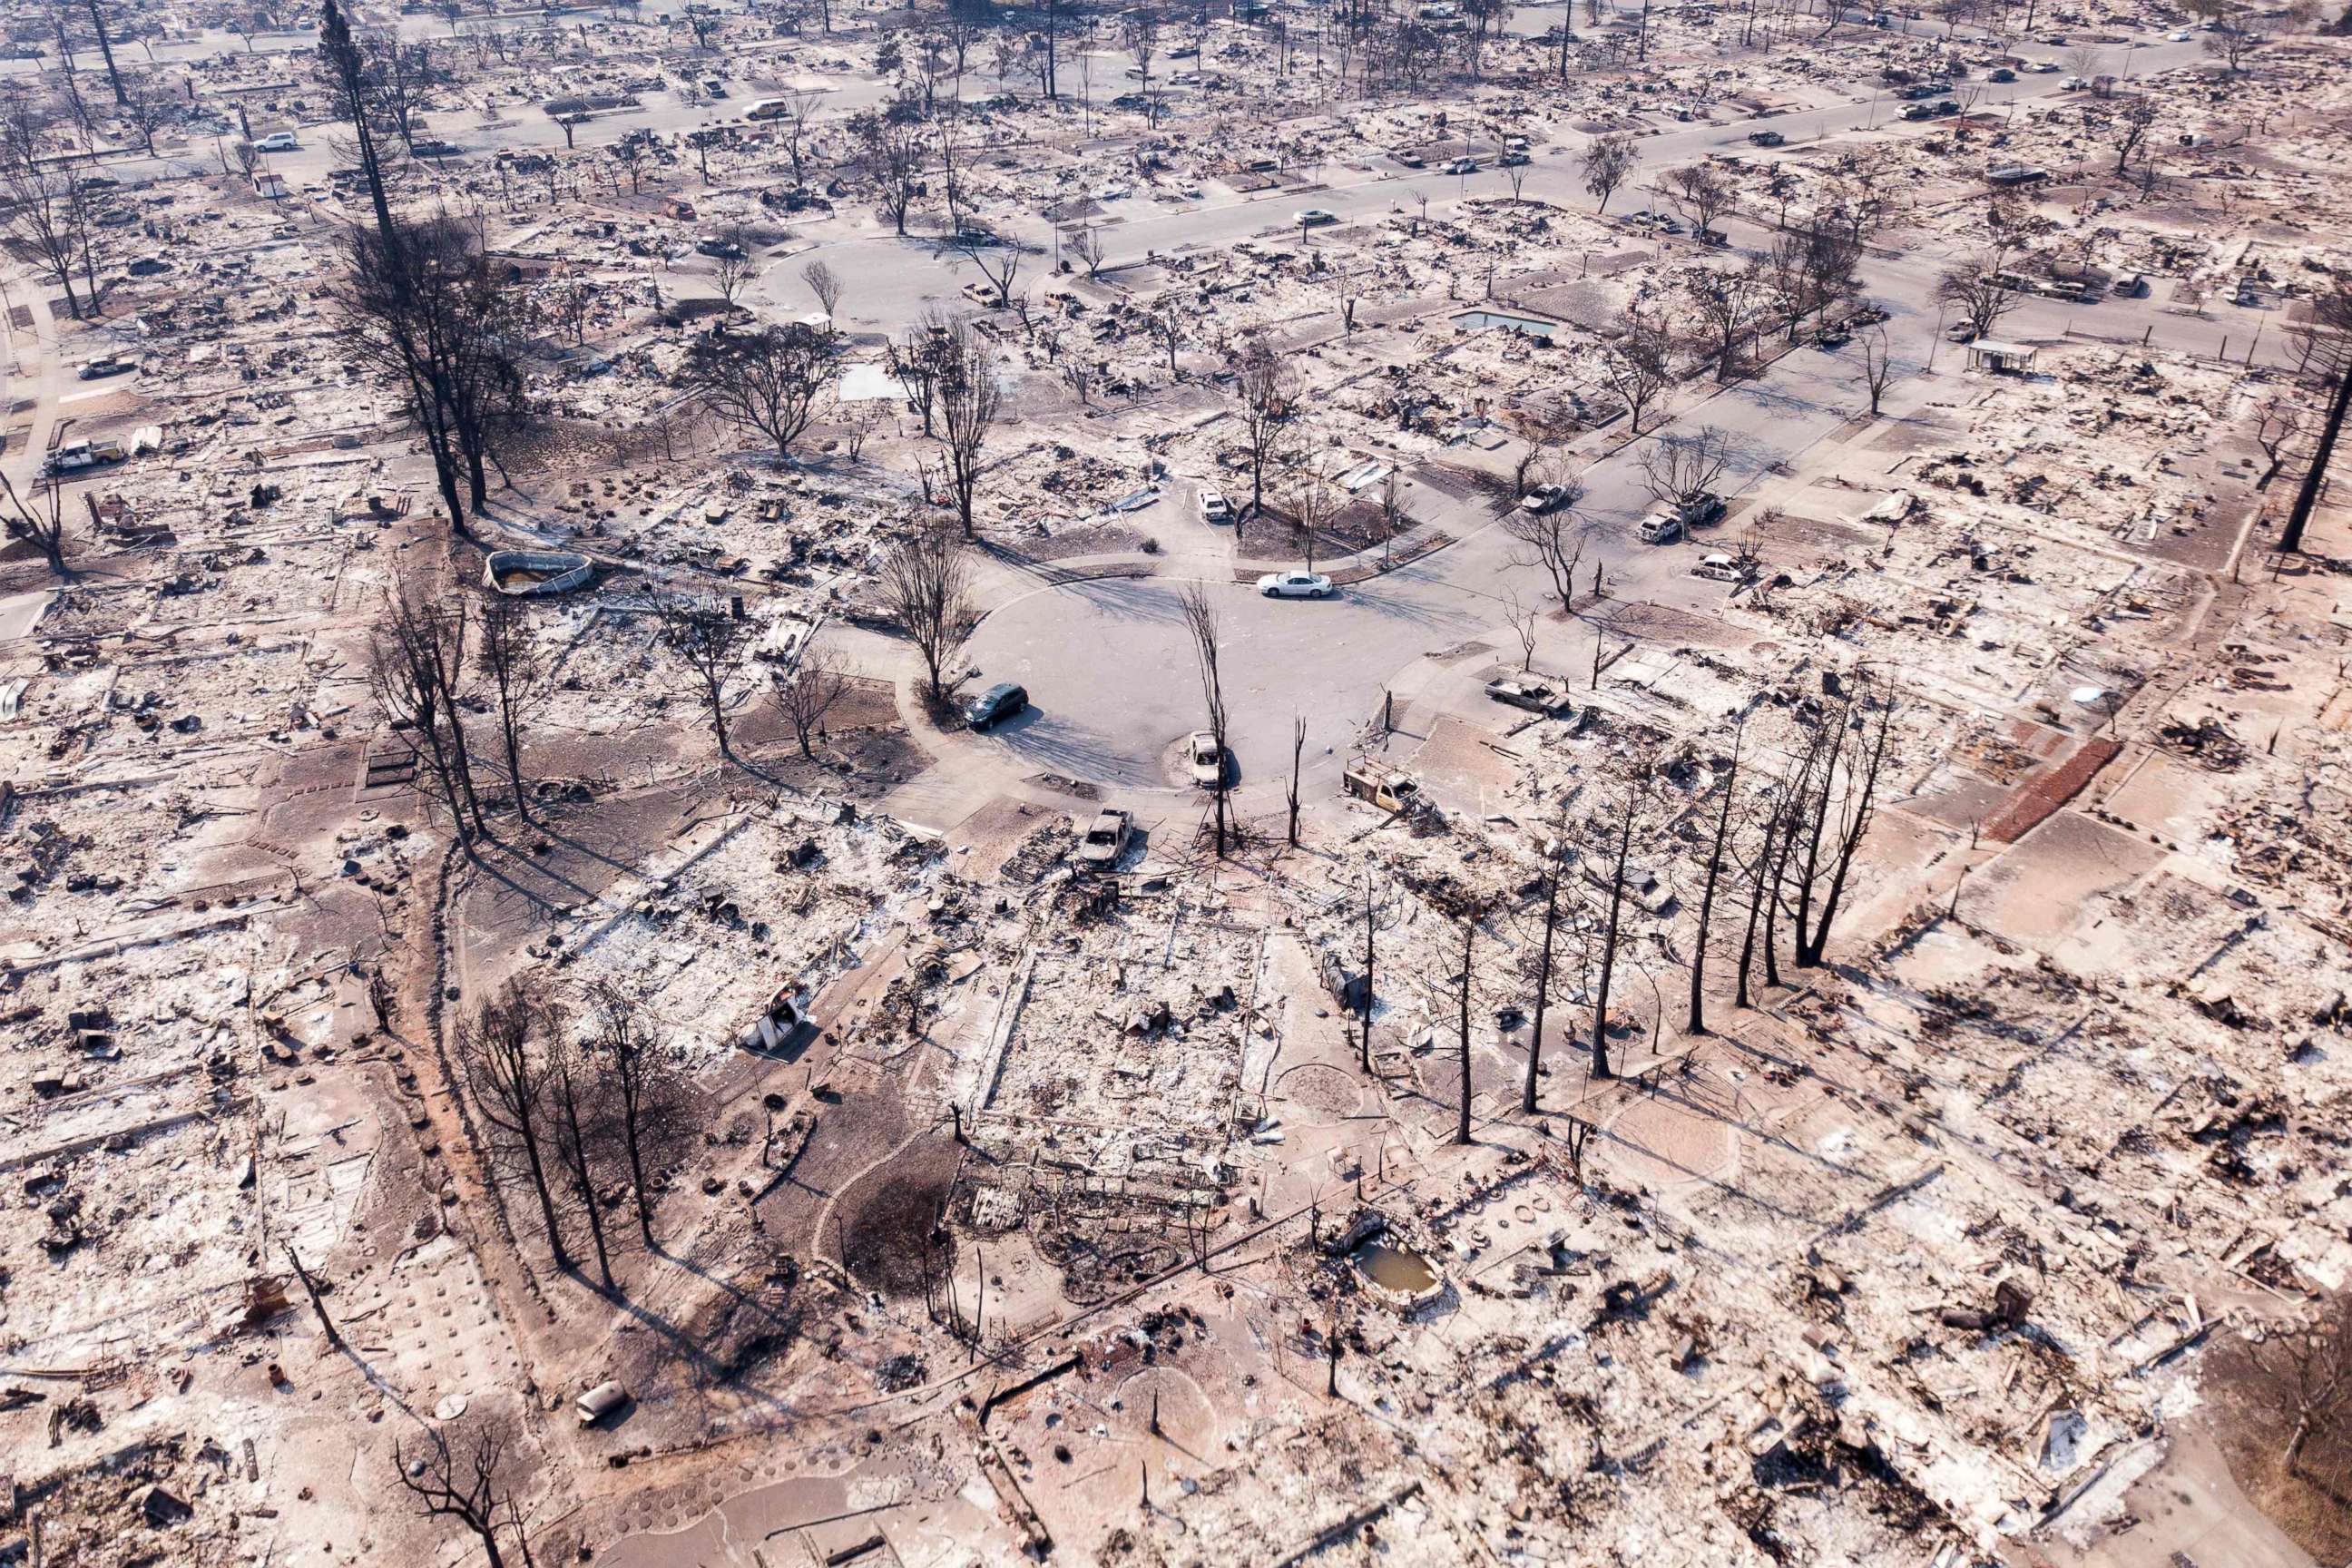 PHOTO: Fire damage is seen from the air in the Coffey Park neighborhood in Santa Rosa, Calif, Oct. 11, 2017. More than 200 fire engines and firefighting crews from around the country were being rushed to California to help battle the fires.